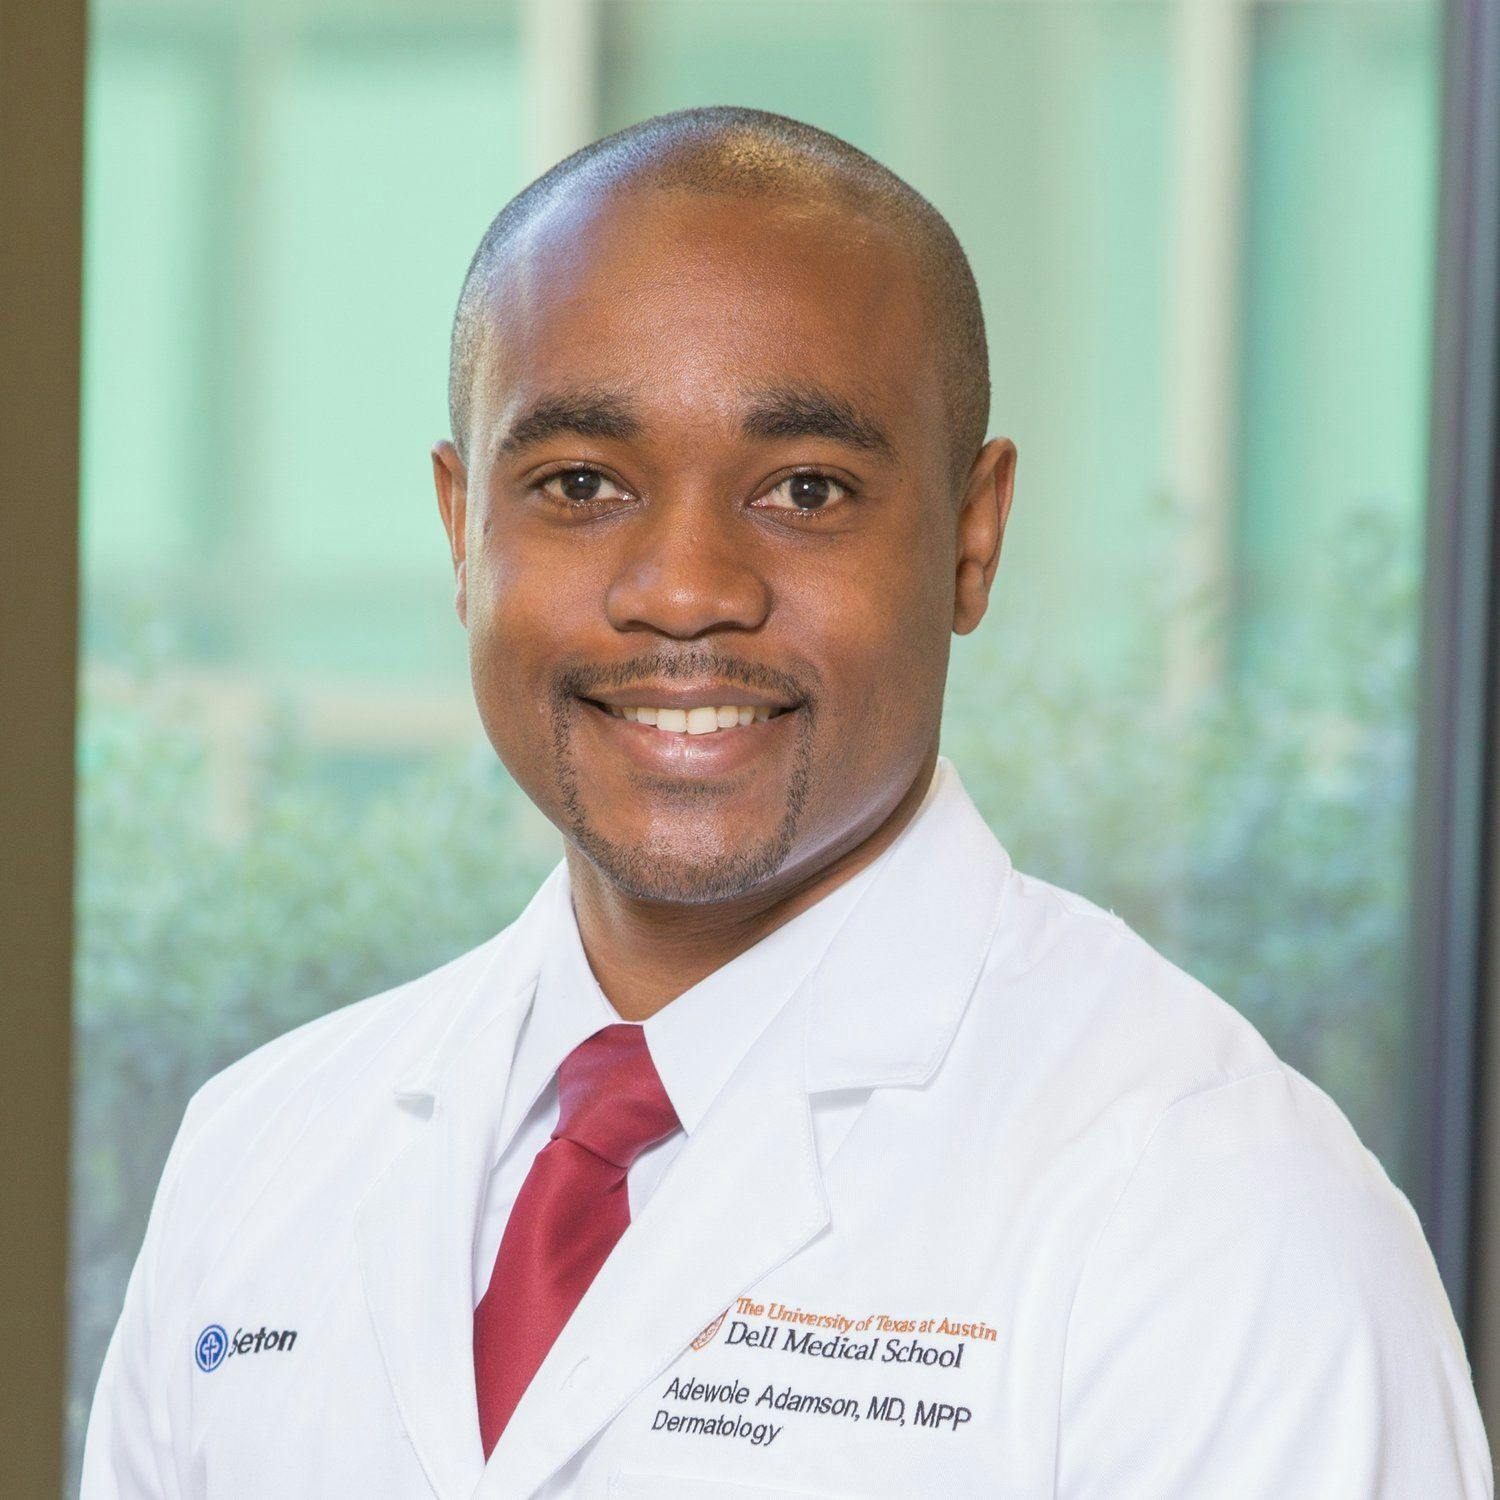 Adewole (Ade) Adamson, MD, MPP: Systemic Racism, Patient Access, and Advancing Health Equity